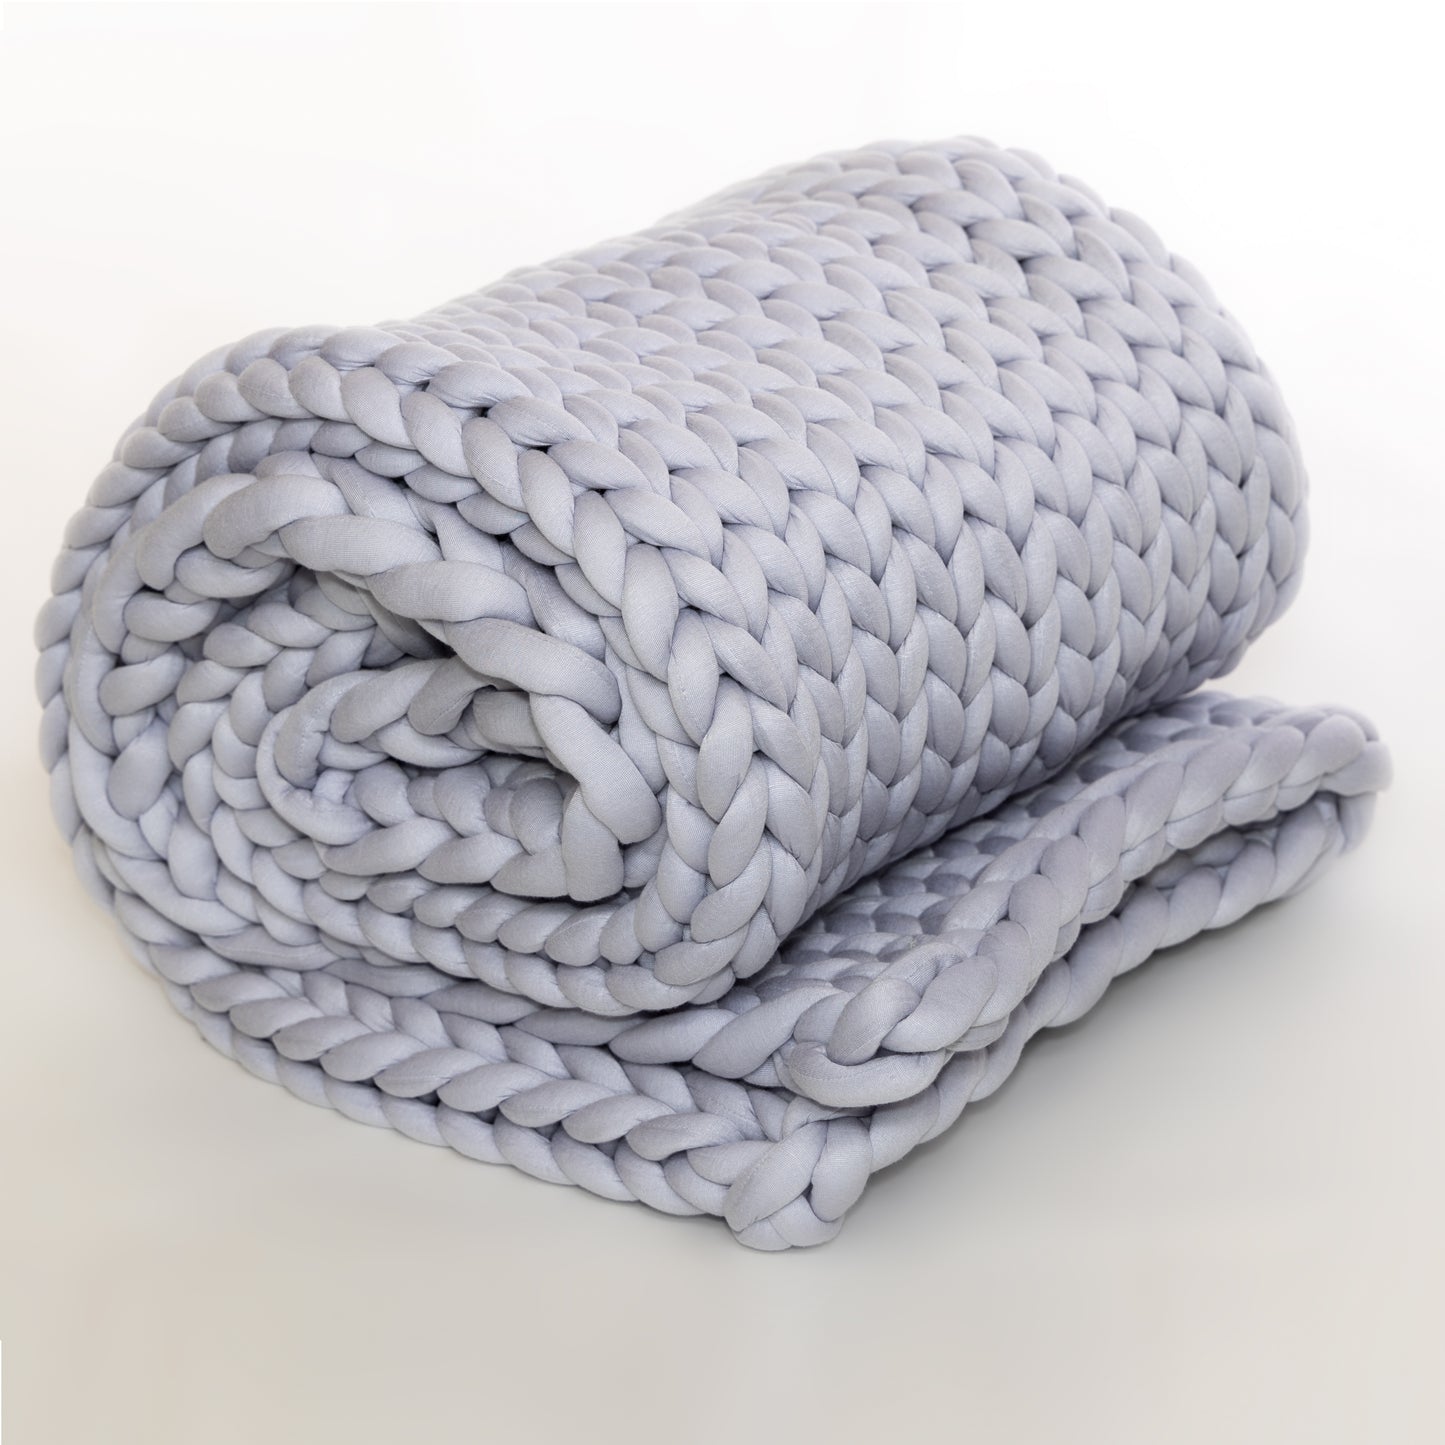 Chunky Knit Weighted Throw, Silver/Gray, 10 pounds